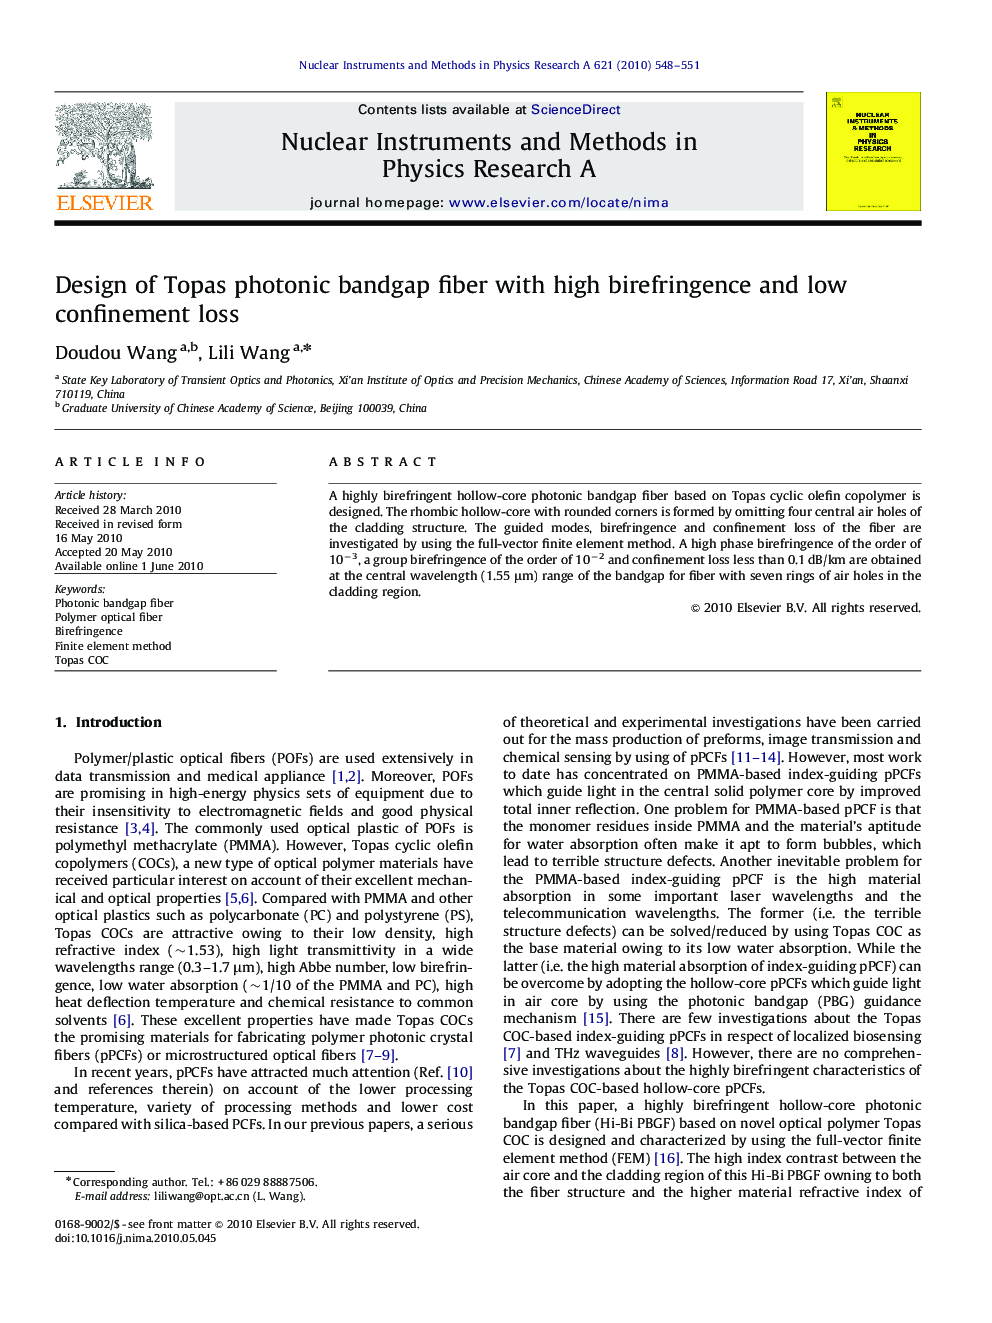 Design of Topas photonic bandgap fiber with high birefringence and low confinement loss